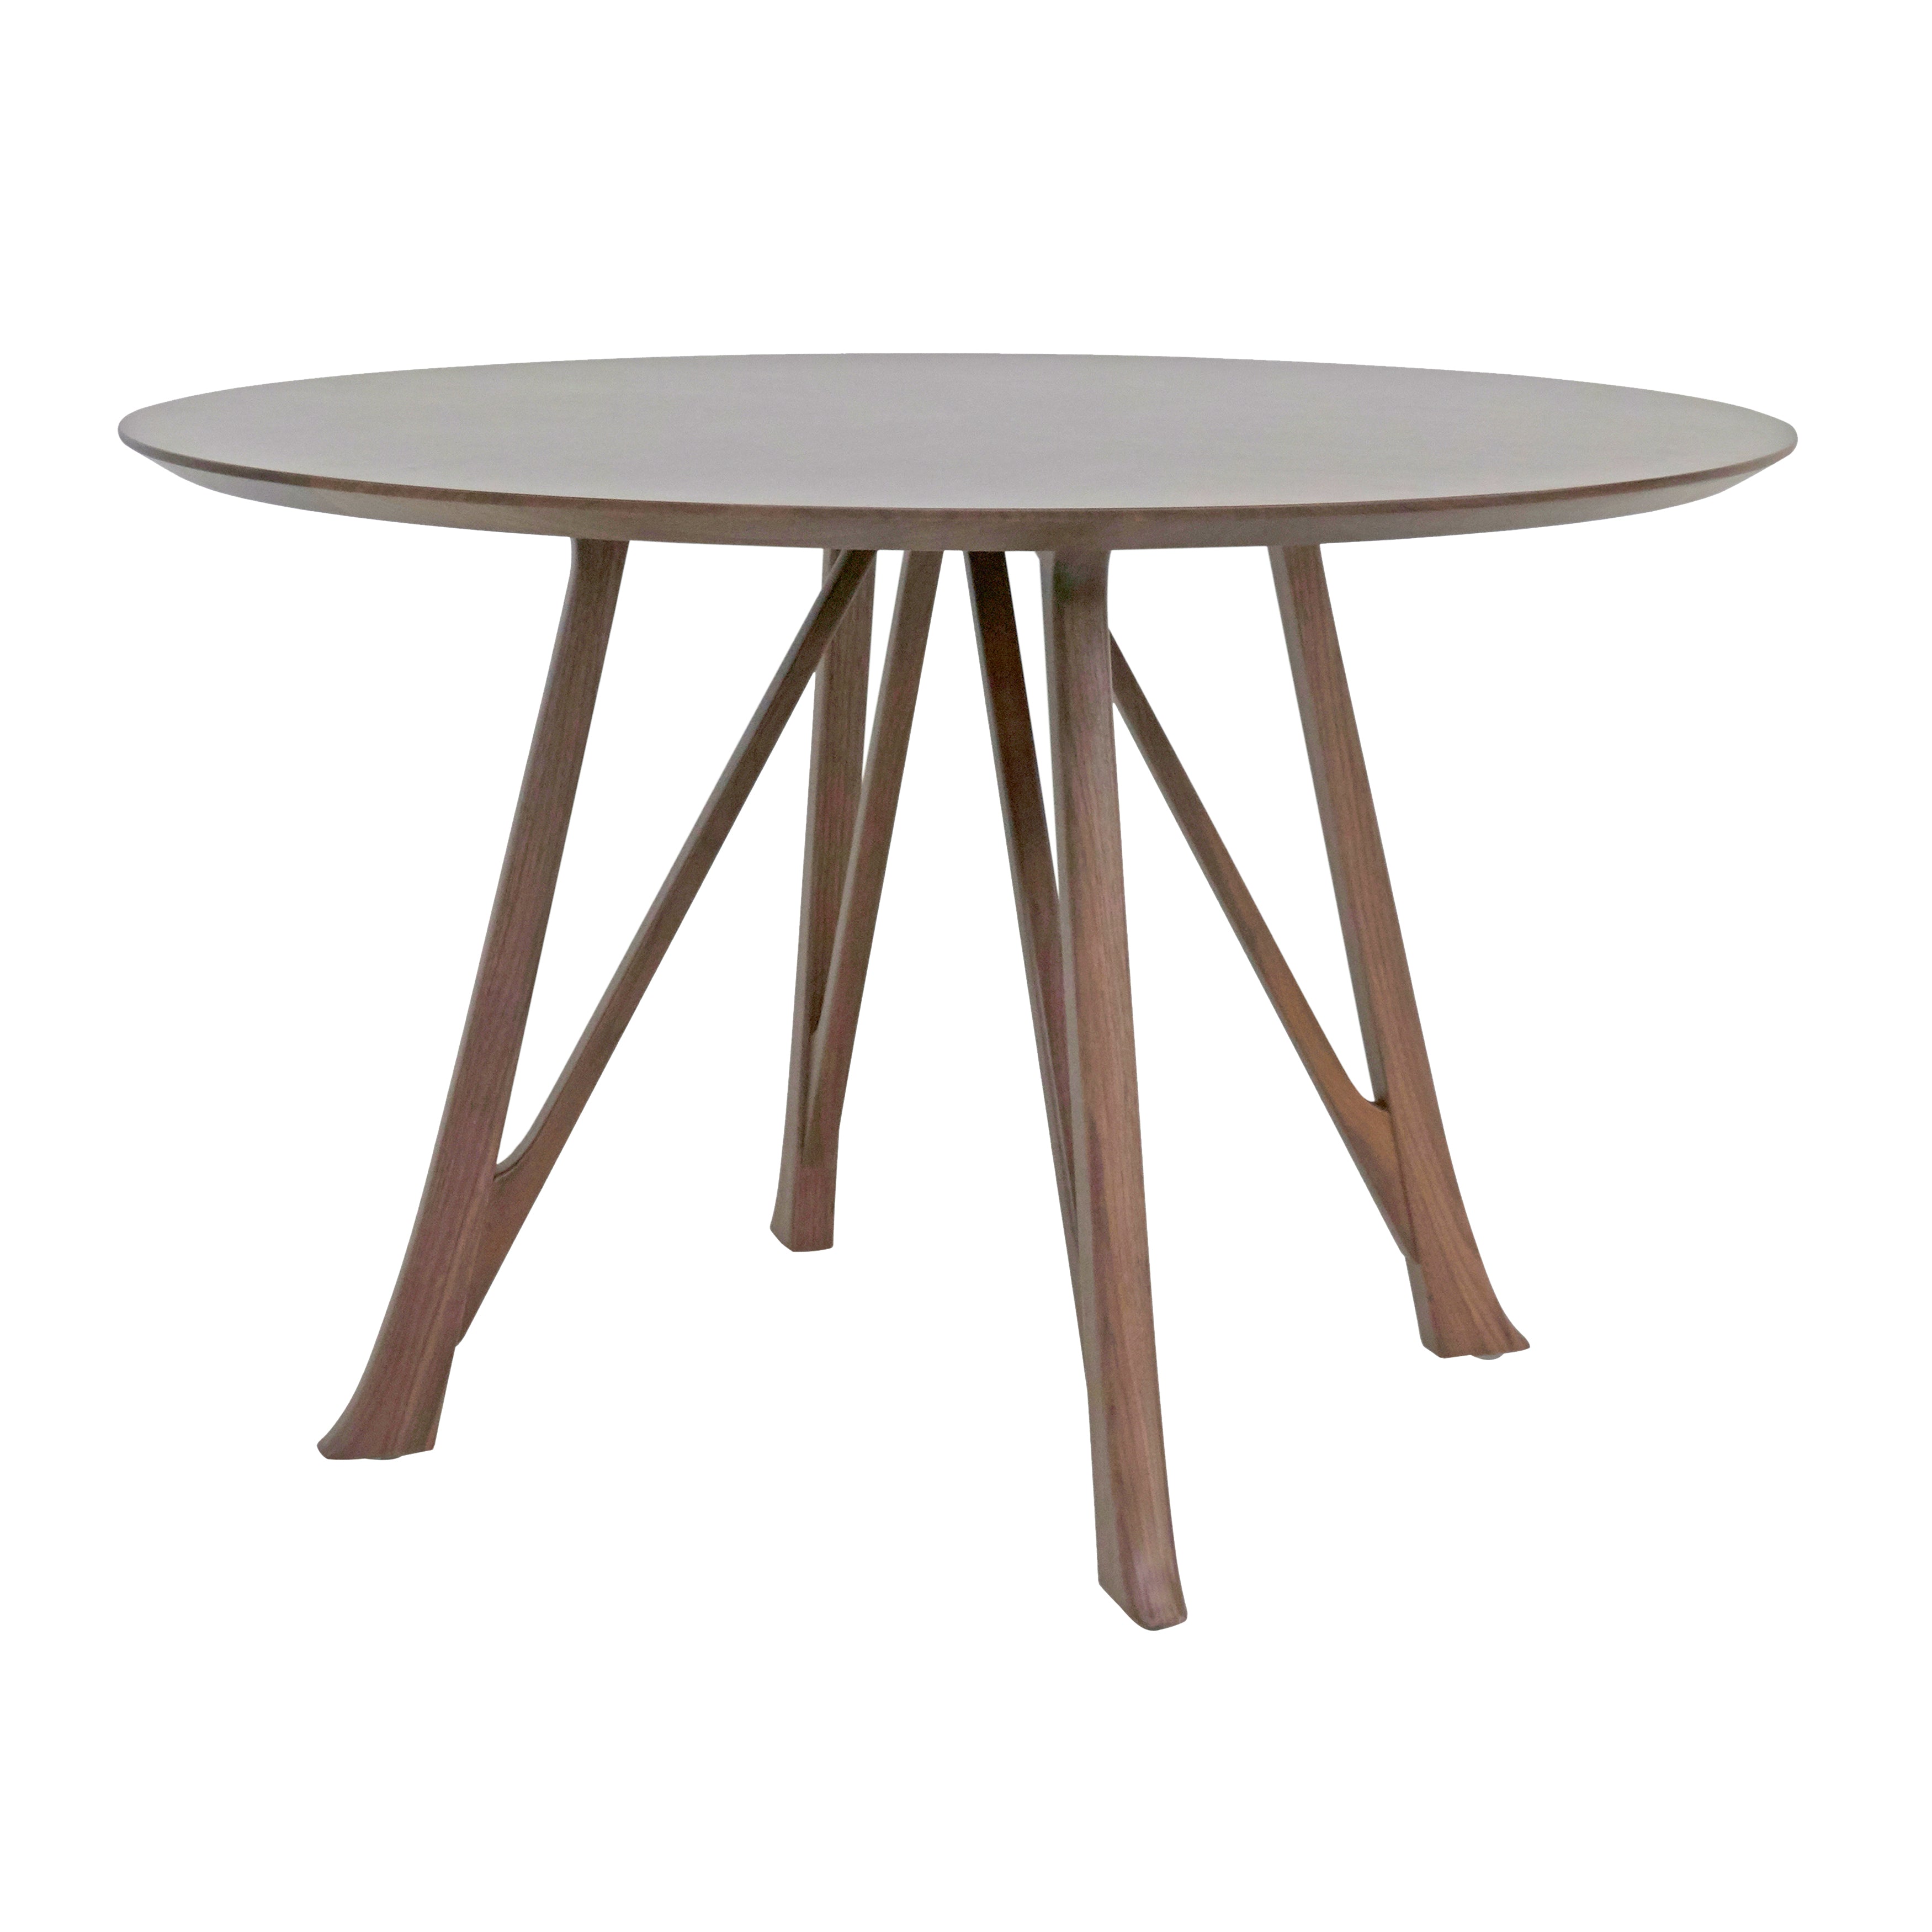 Stay Dining Table: Natural Walnut